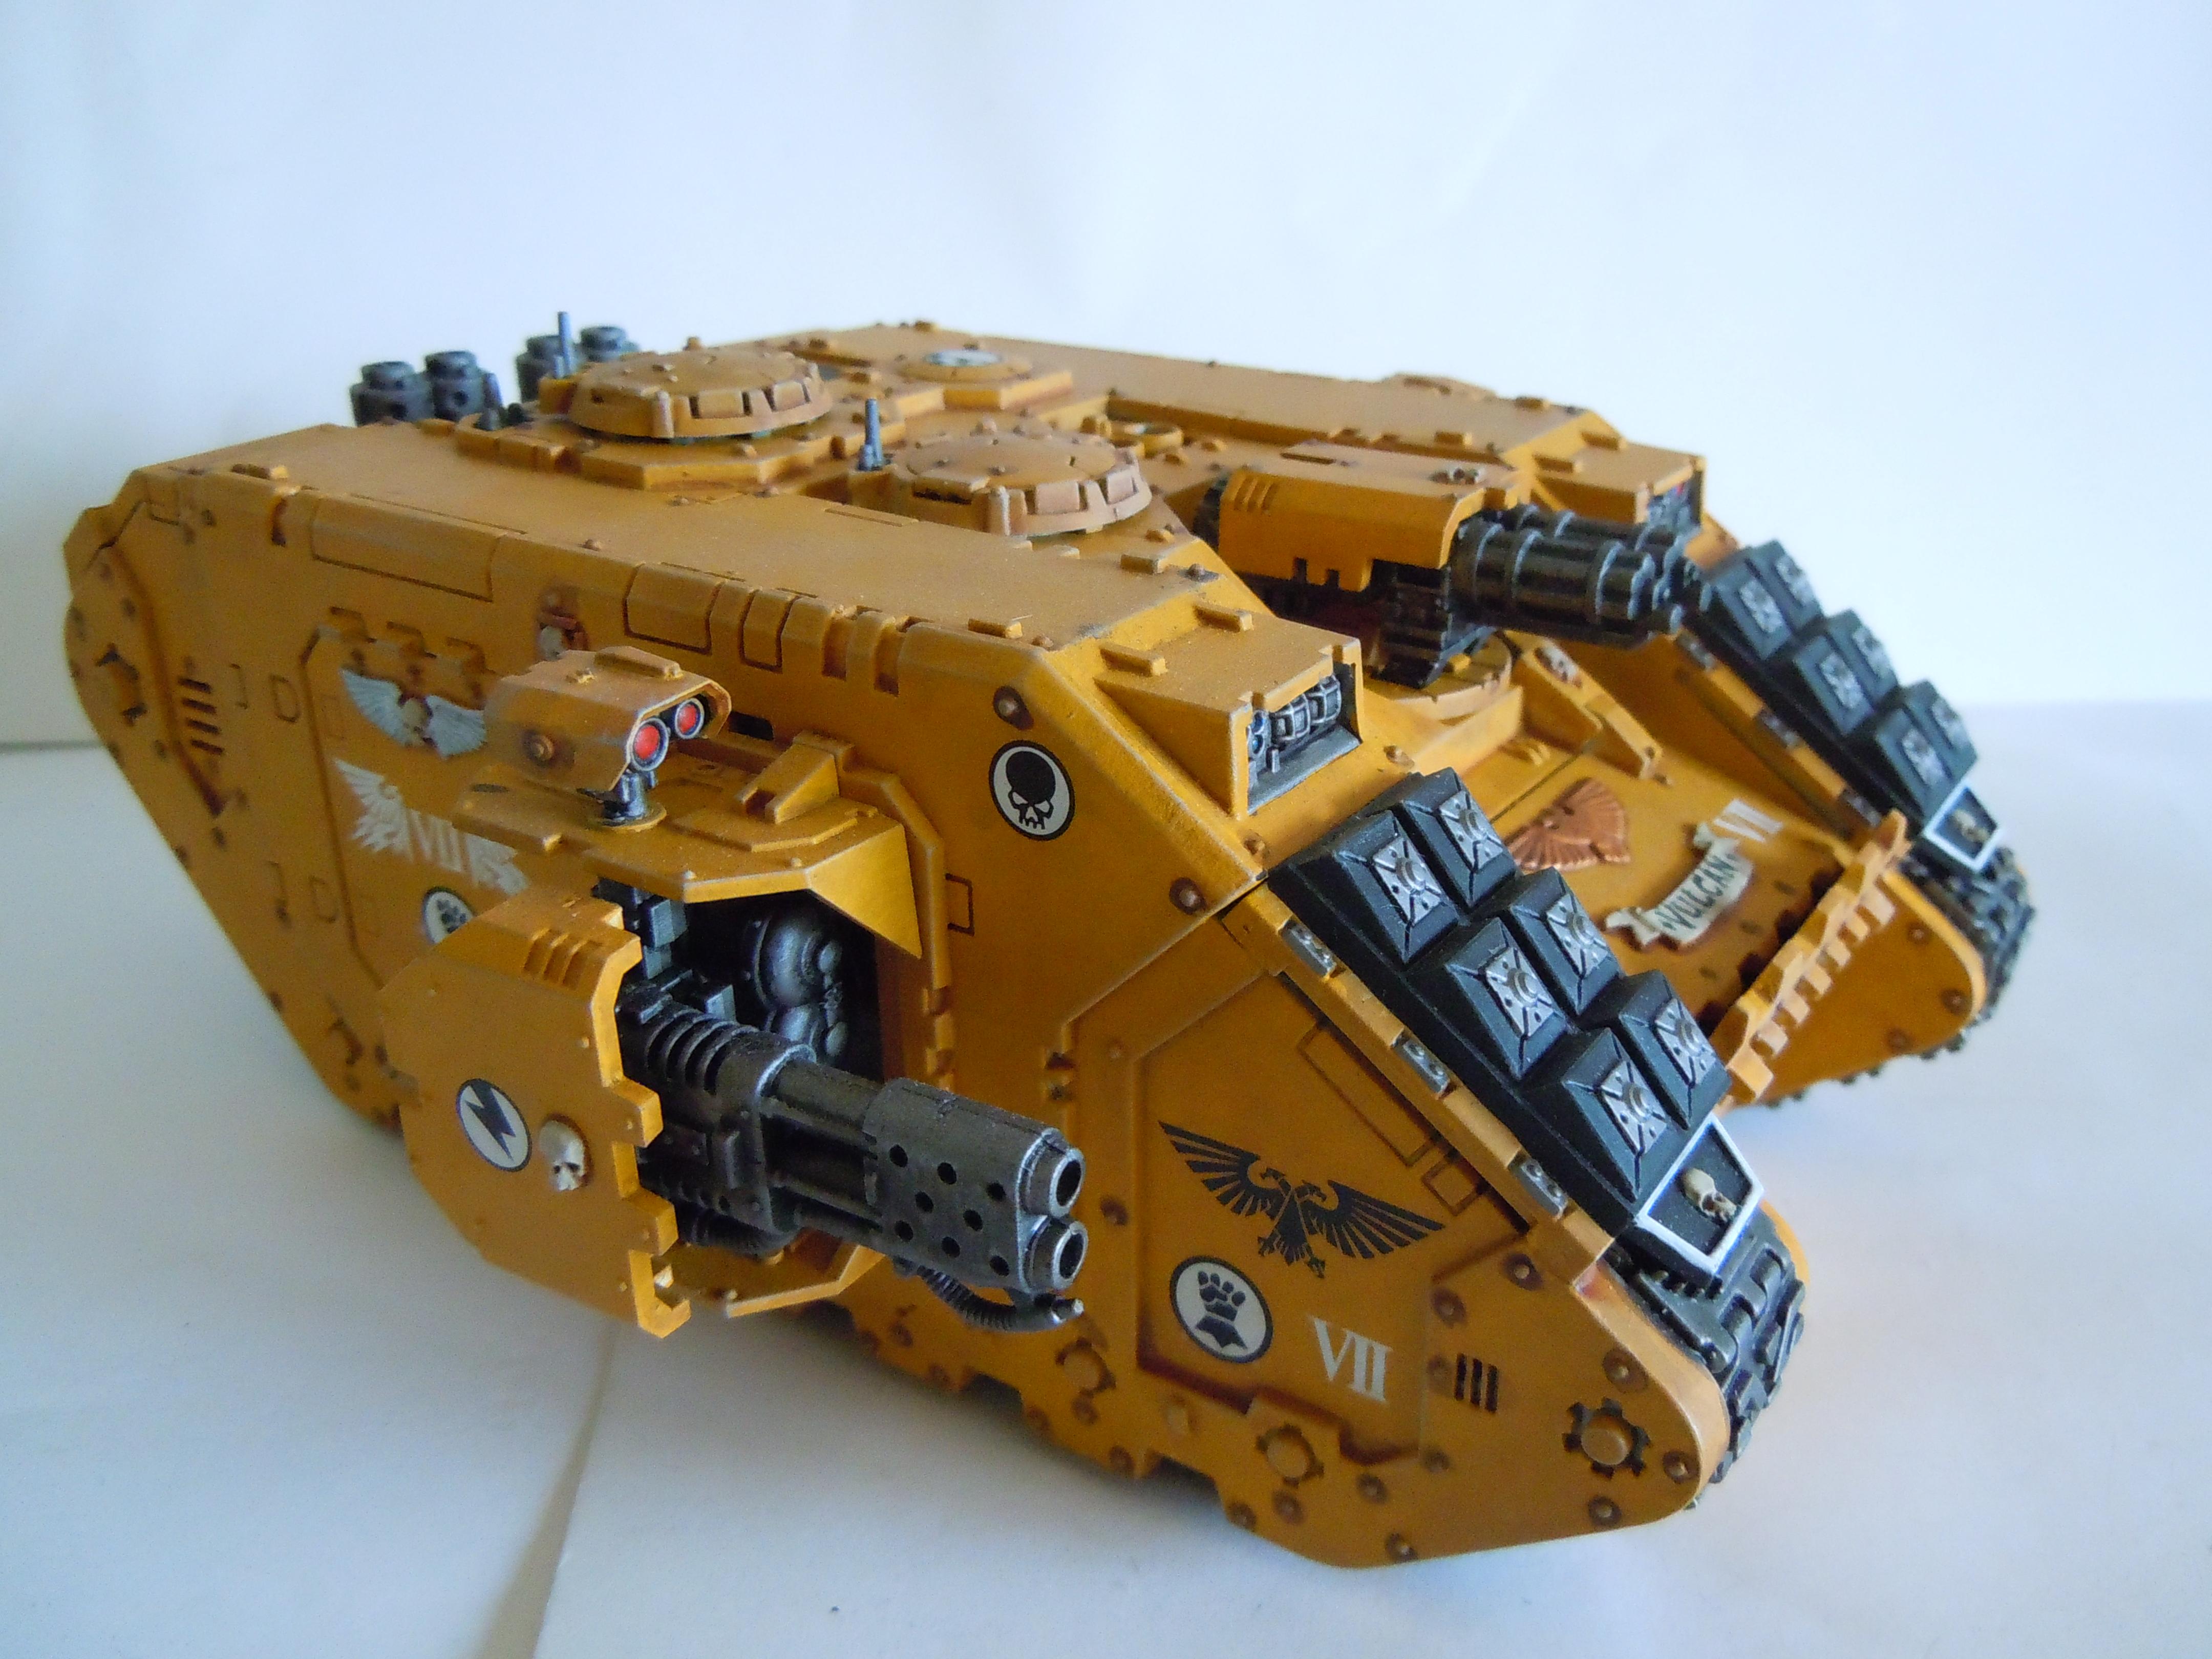 Imperial Fists, Land Raider, Redeemer, Space Marines